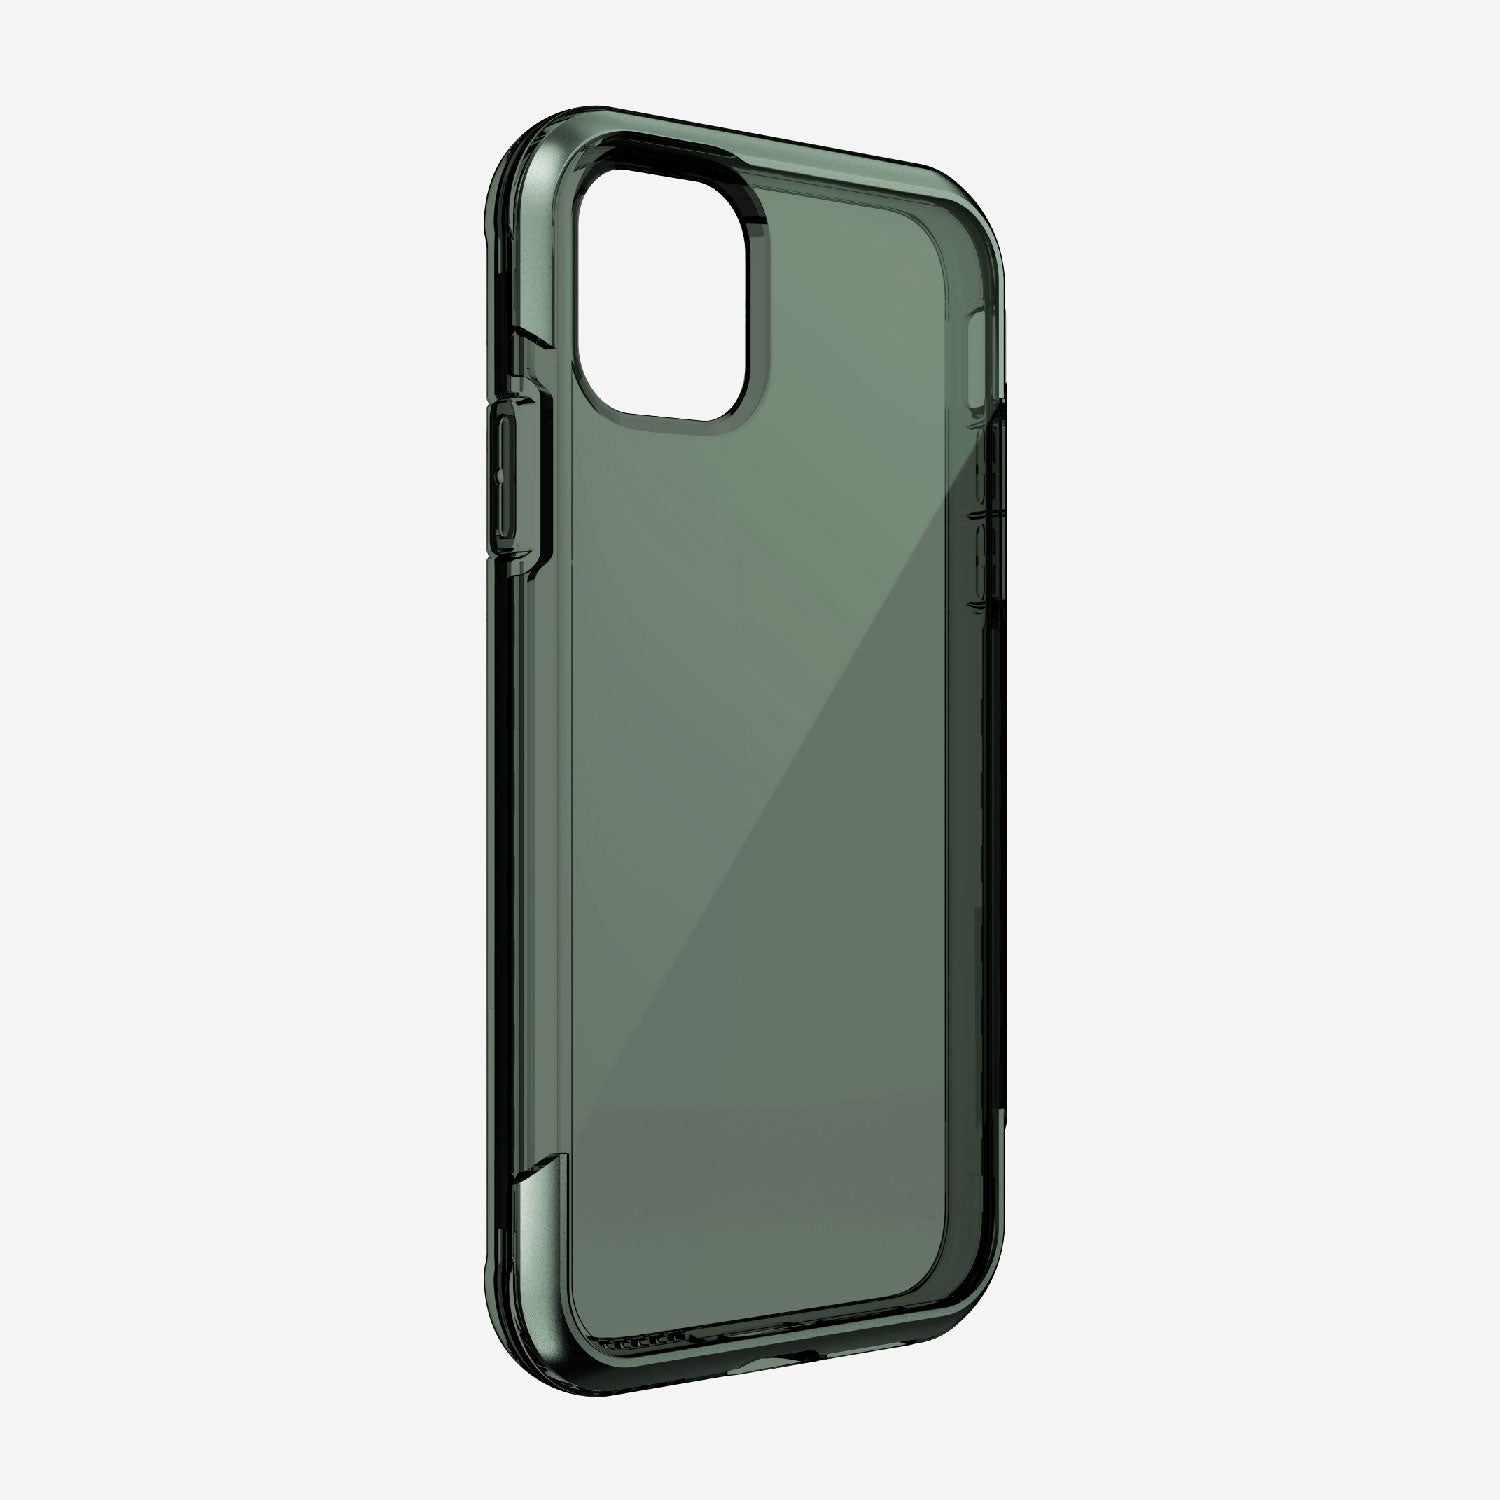 Raptic Air | Protective iPhone 11 cases